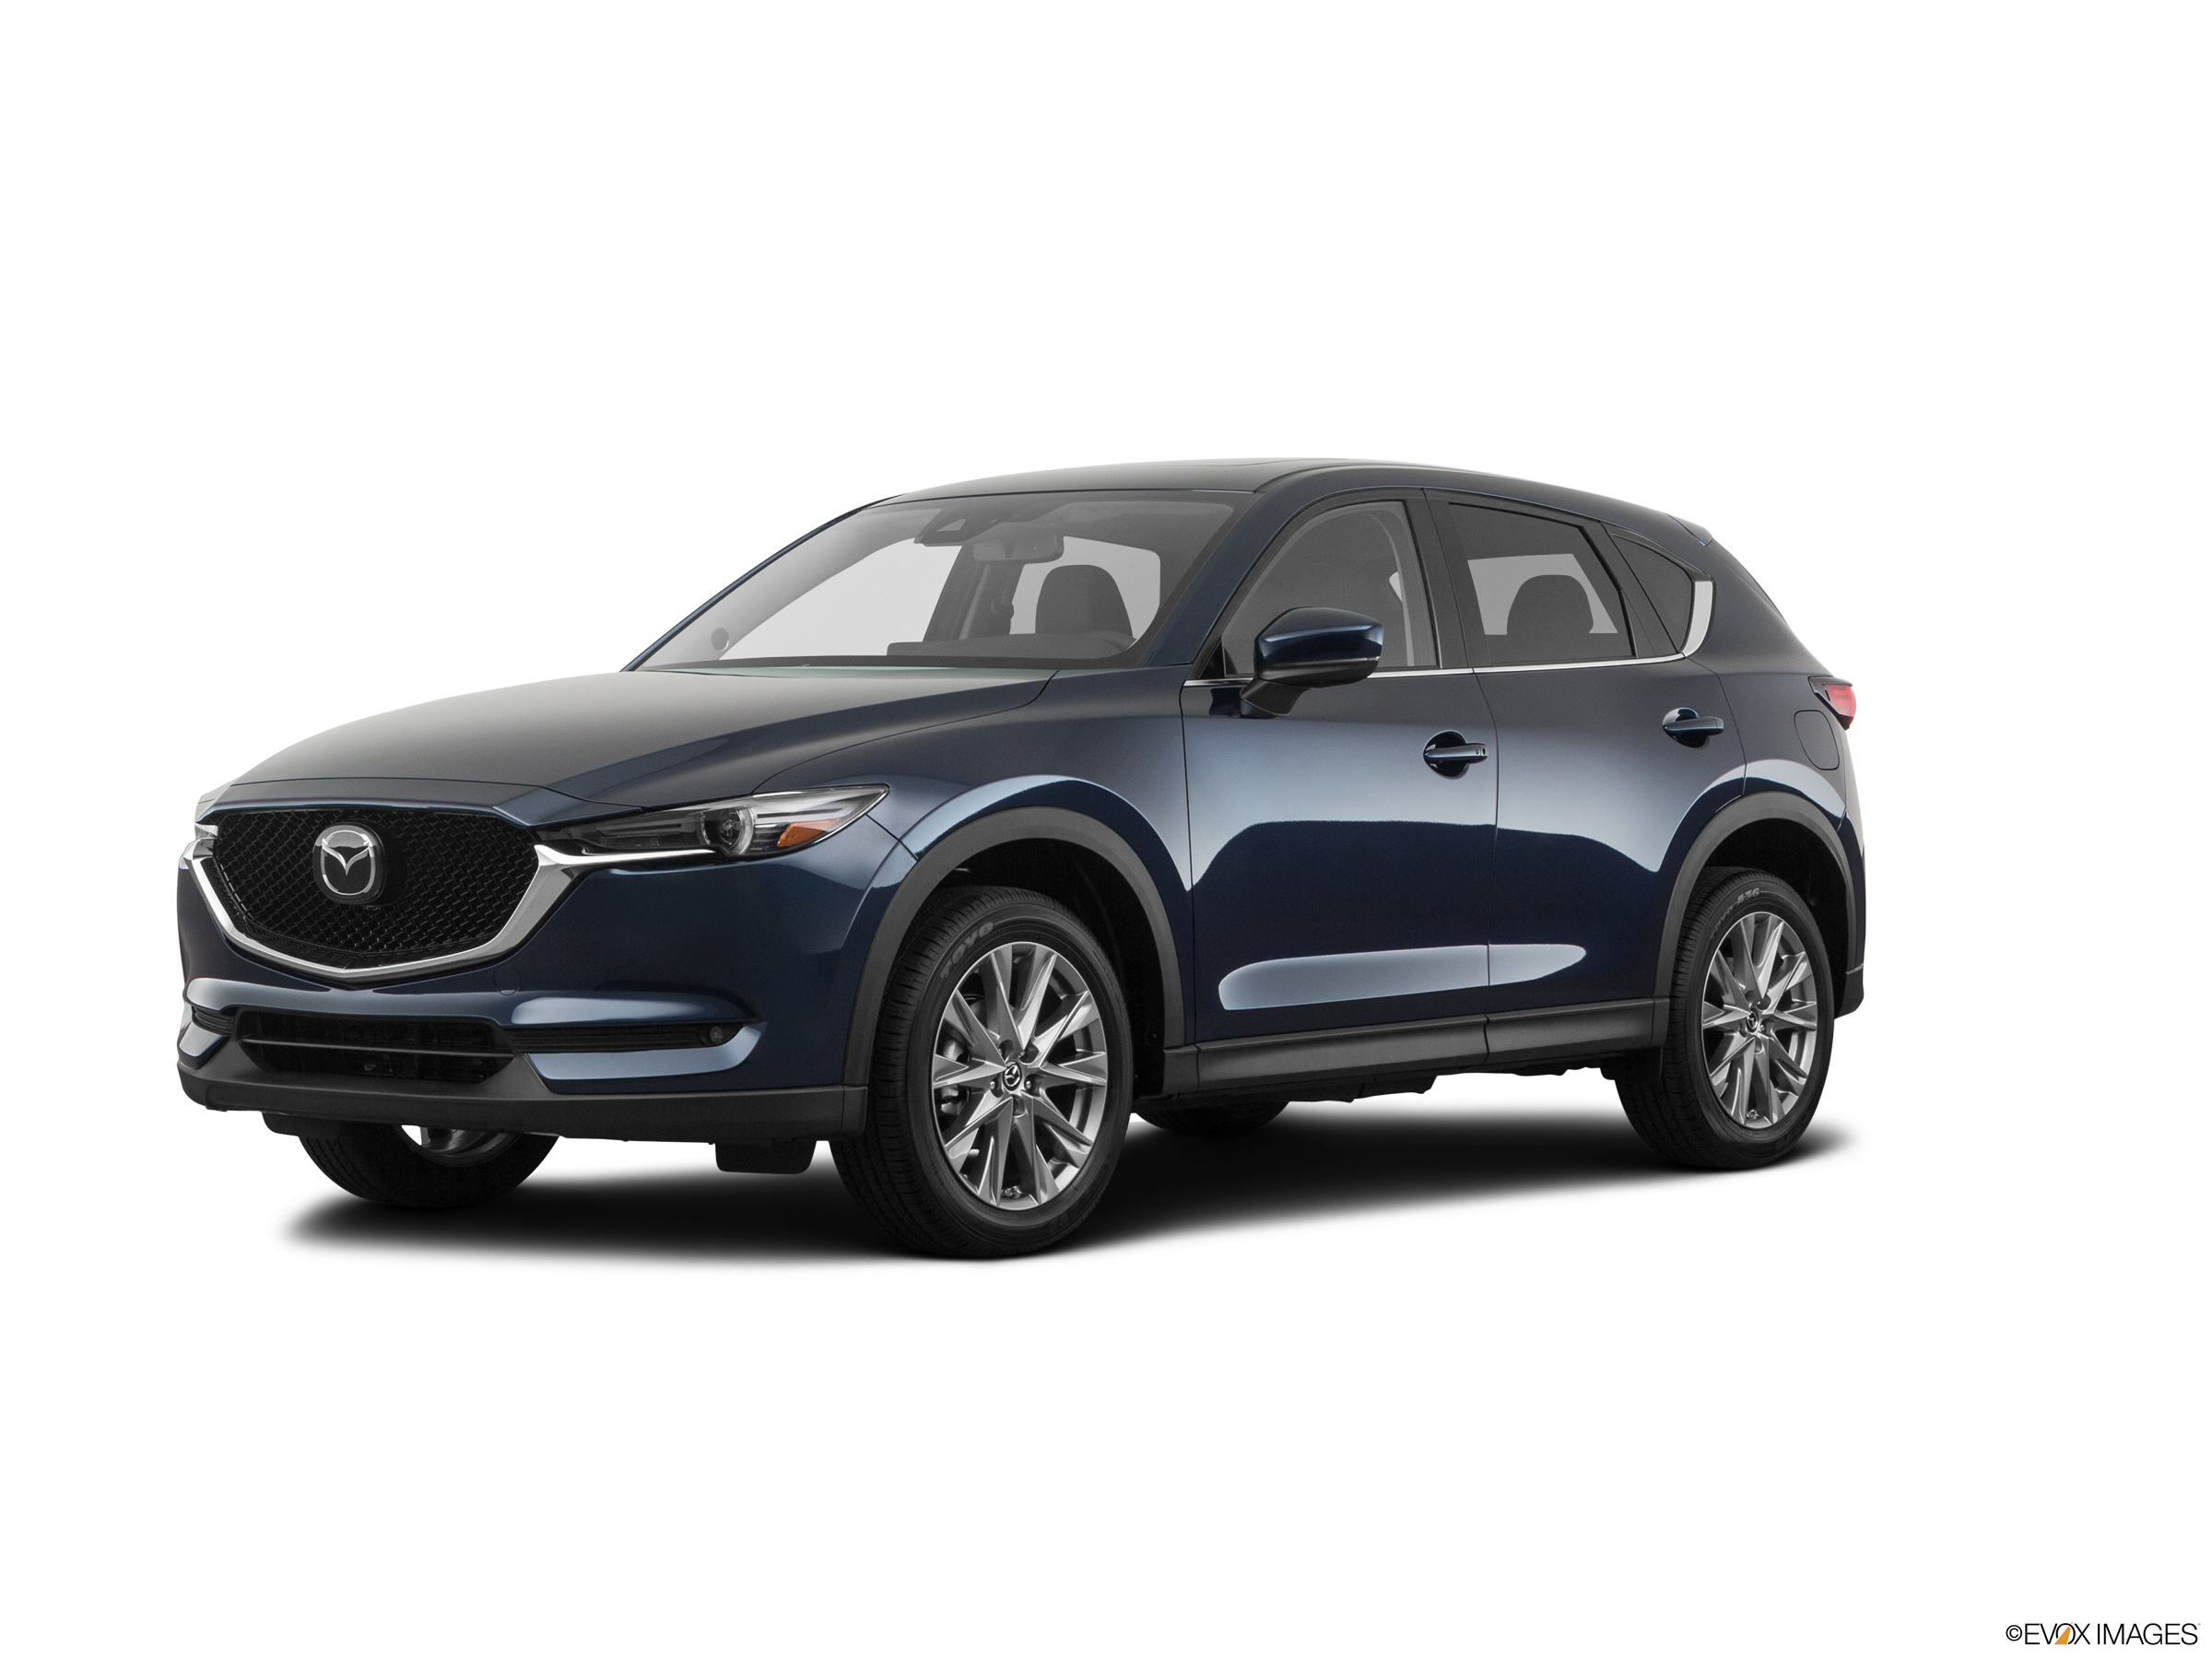 New 2020 MAZDA CX-5 Grand Touring Pricing | Kelley Blue Book